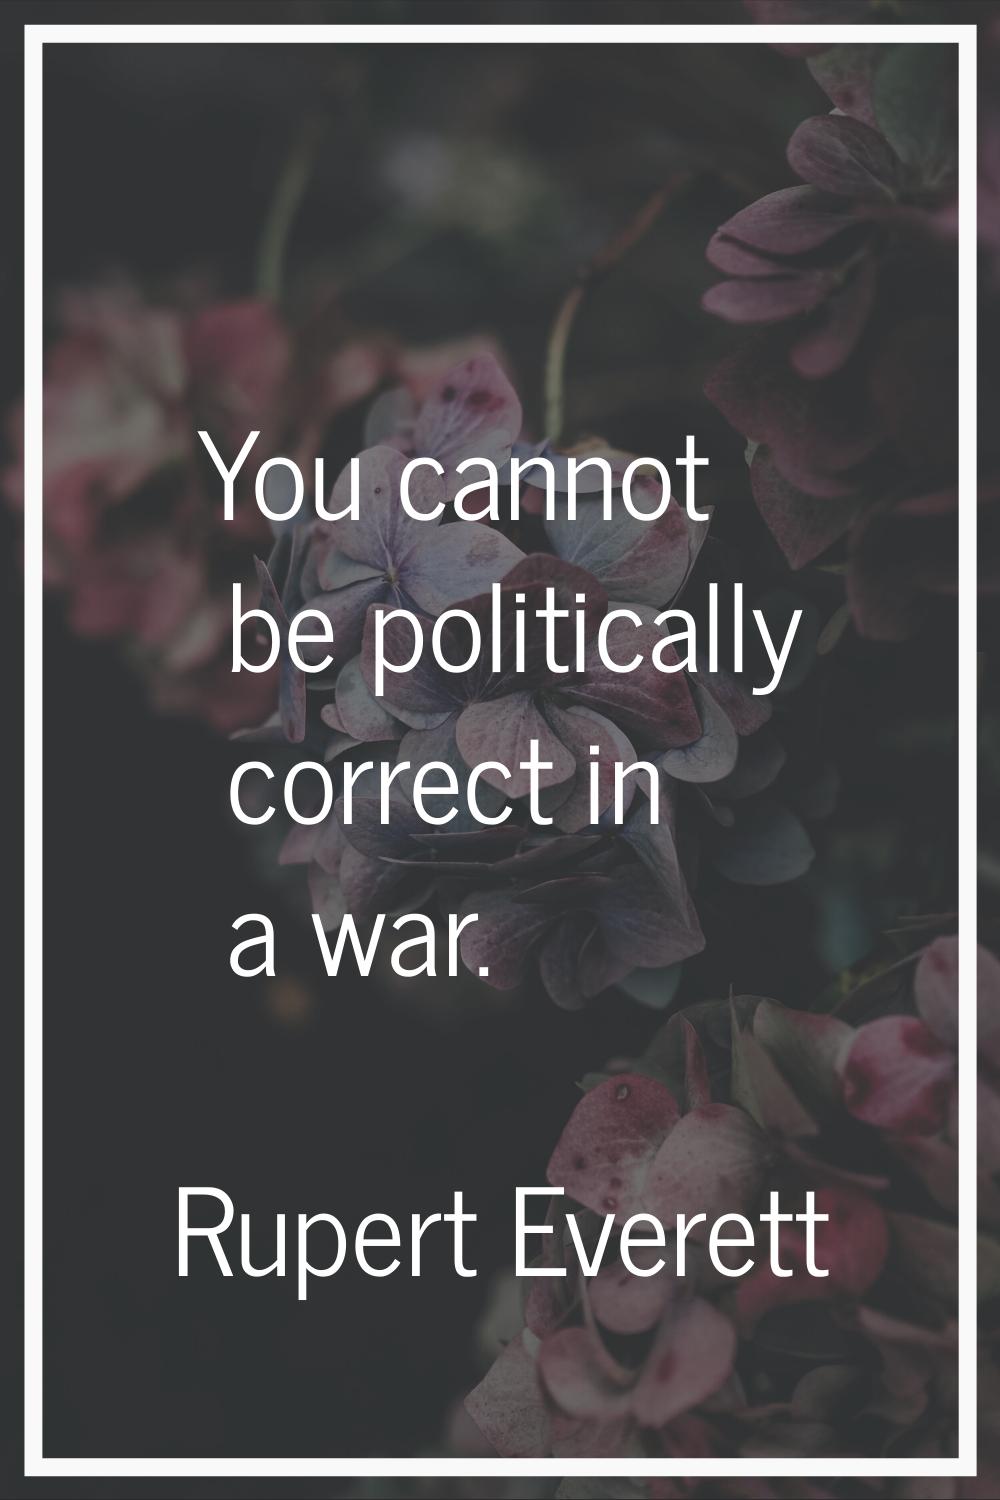 You cannot be politically correct in a war.